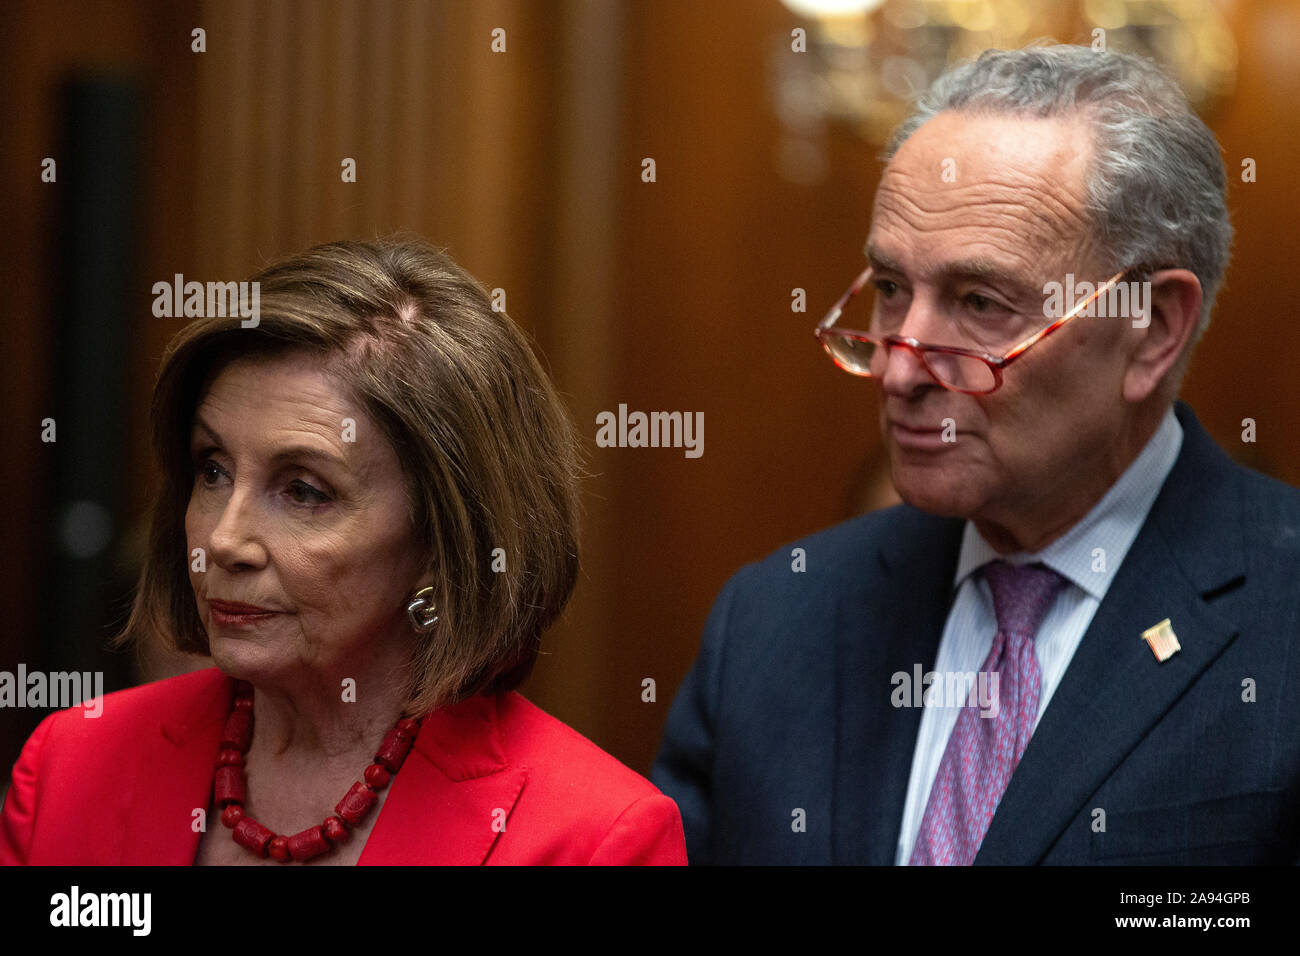 Speaker of the United States House of Representatives Nancy Pelosi (Democrat of California) and United States Senate Minority Leader Chuck Schumer (Democrat of New York) attend a press conference on the Deferred Action for Childhood Arrivals program on Capitol Hill in Washington, DC, U.S. on Tuesday, November 12, 2019. The Supreme Court is currently hearing a case that will determine the legality and future of the DACA program. Credit: Stefani Reynolds/CNP /MediaPunch Stock Photo